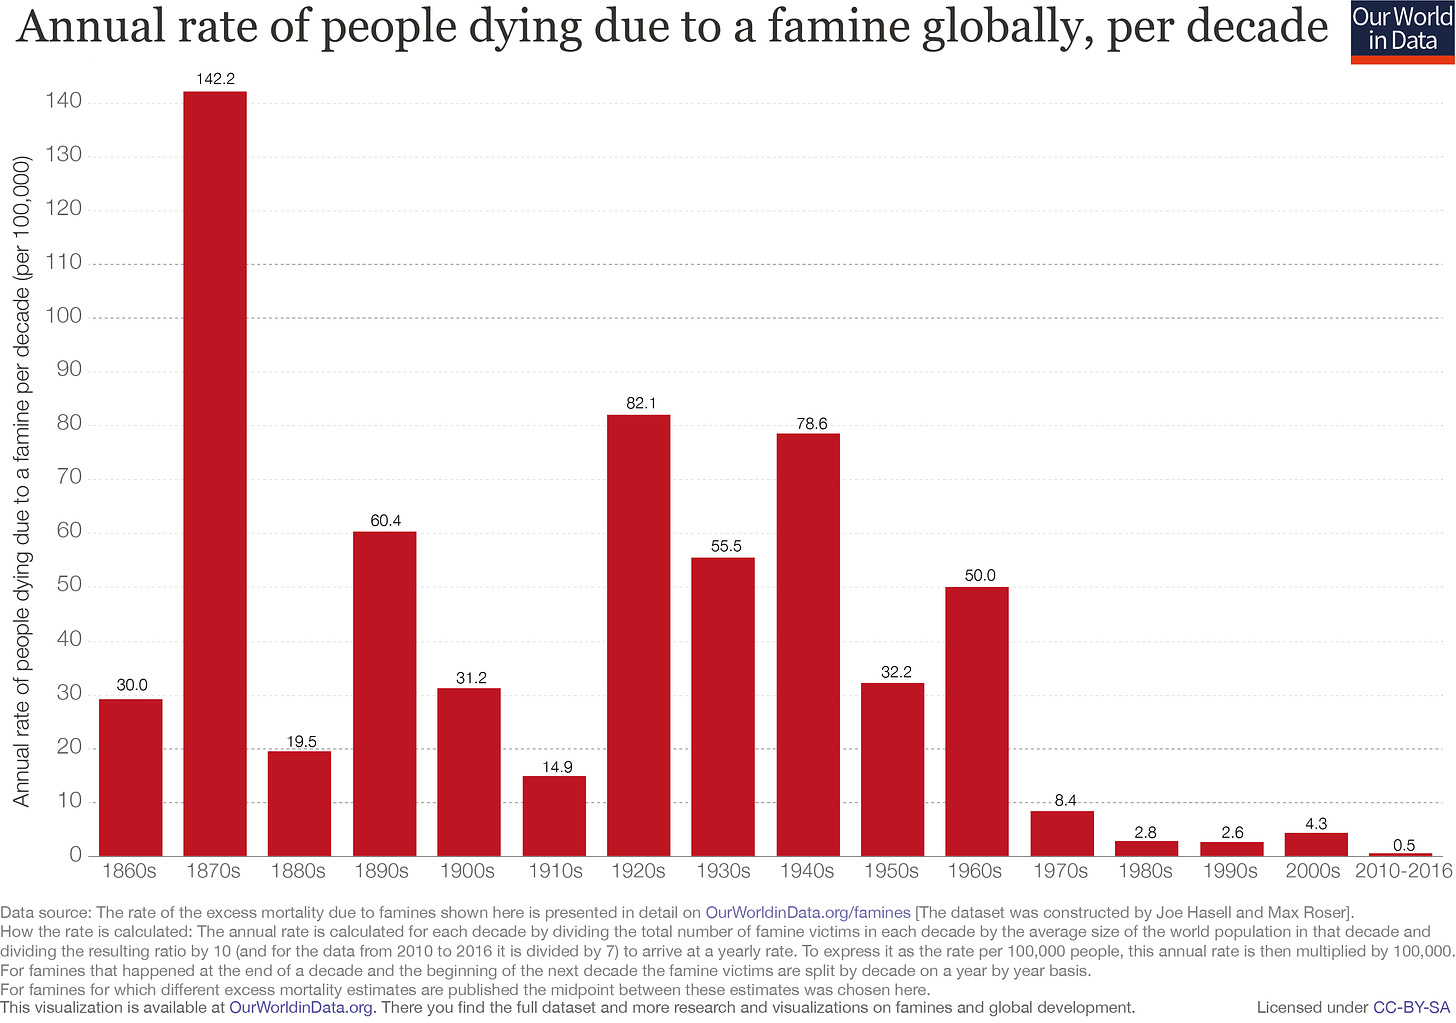 Famine mortality over the long run - Our World in Data